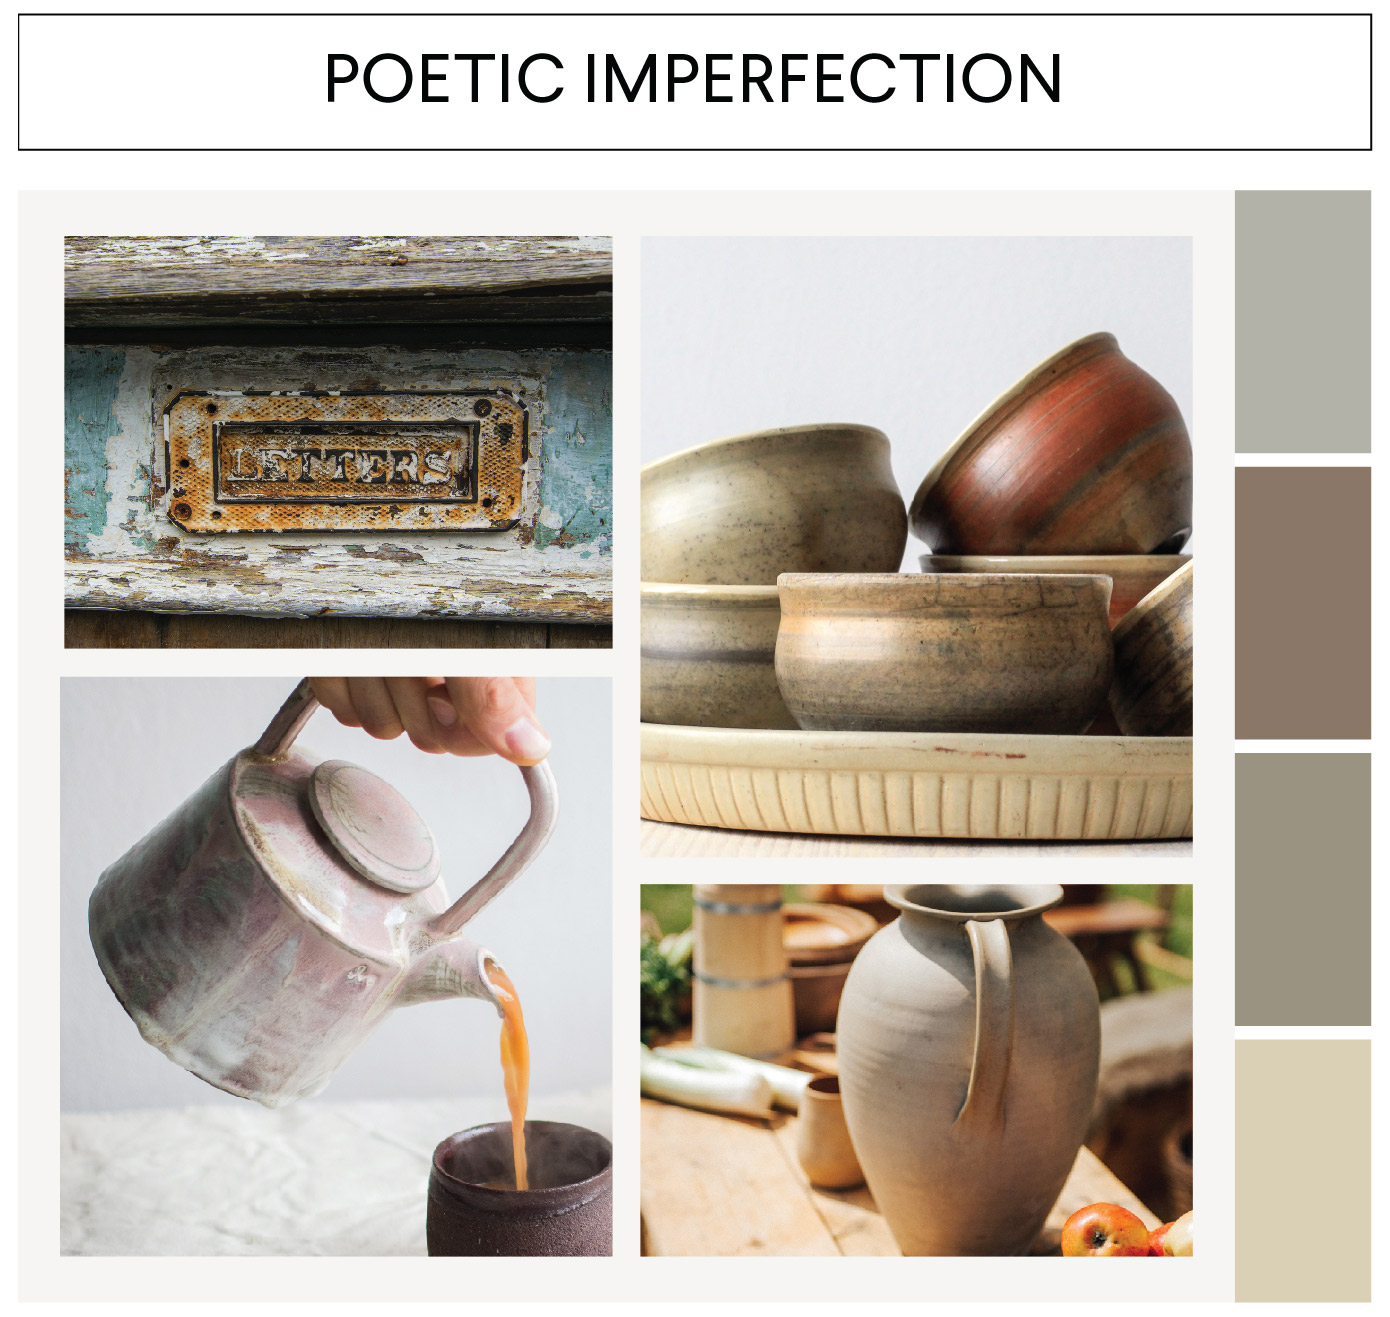 image of colorful pots that links to poetic imperfection page